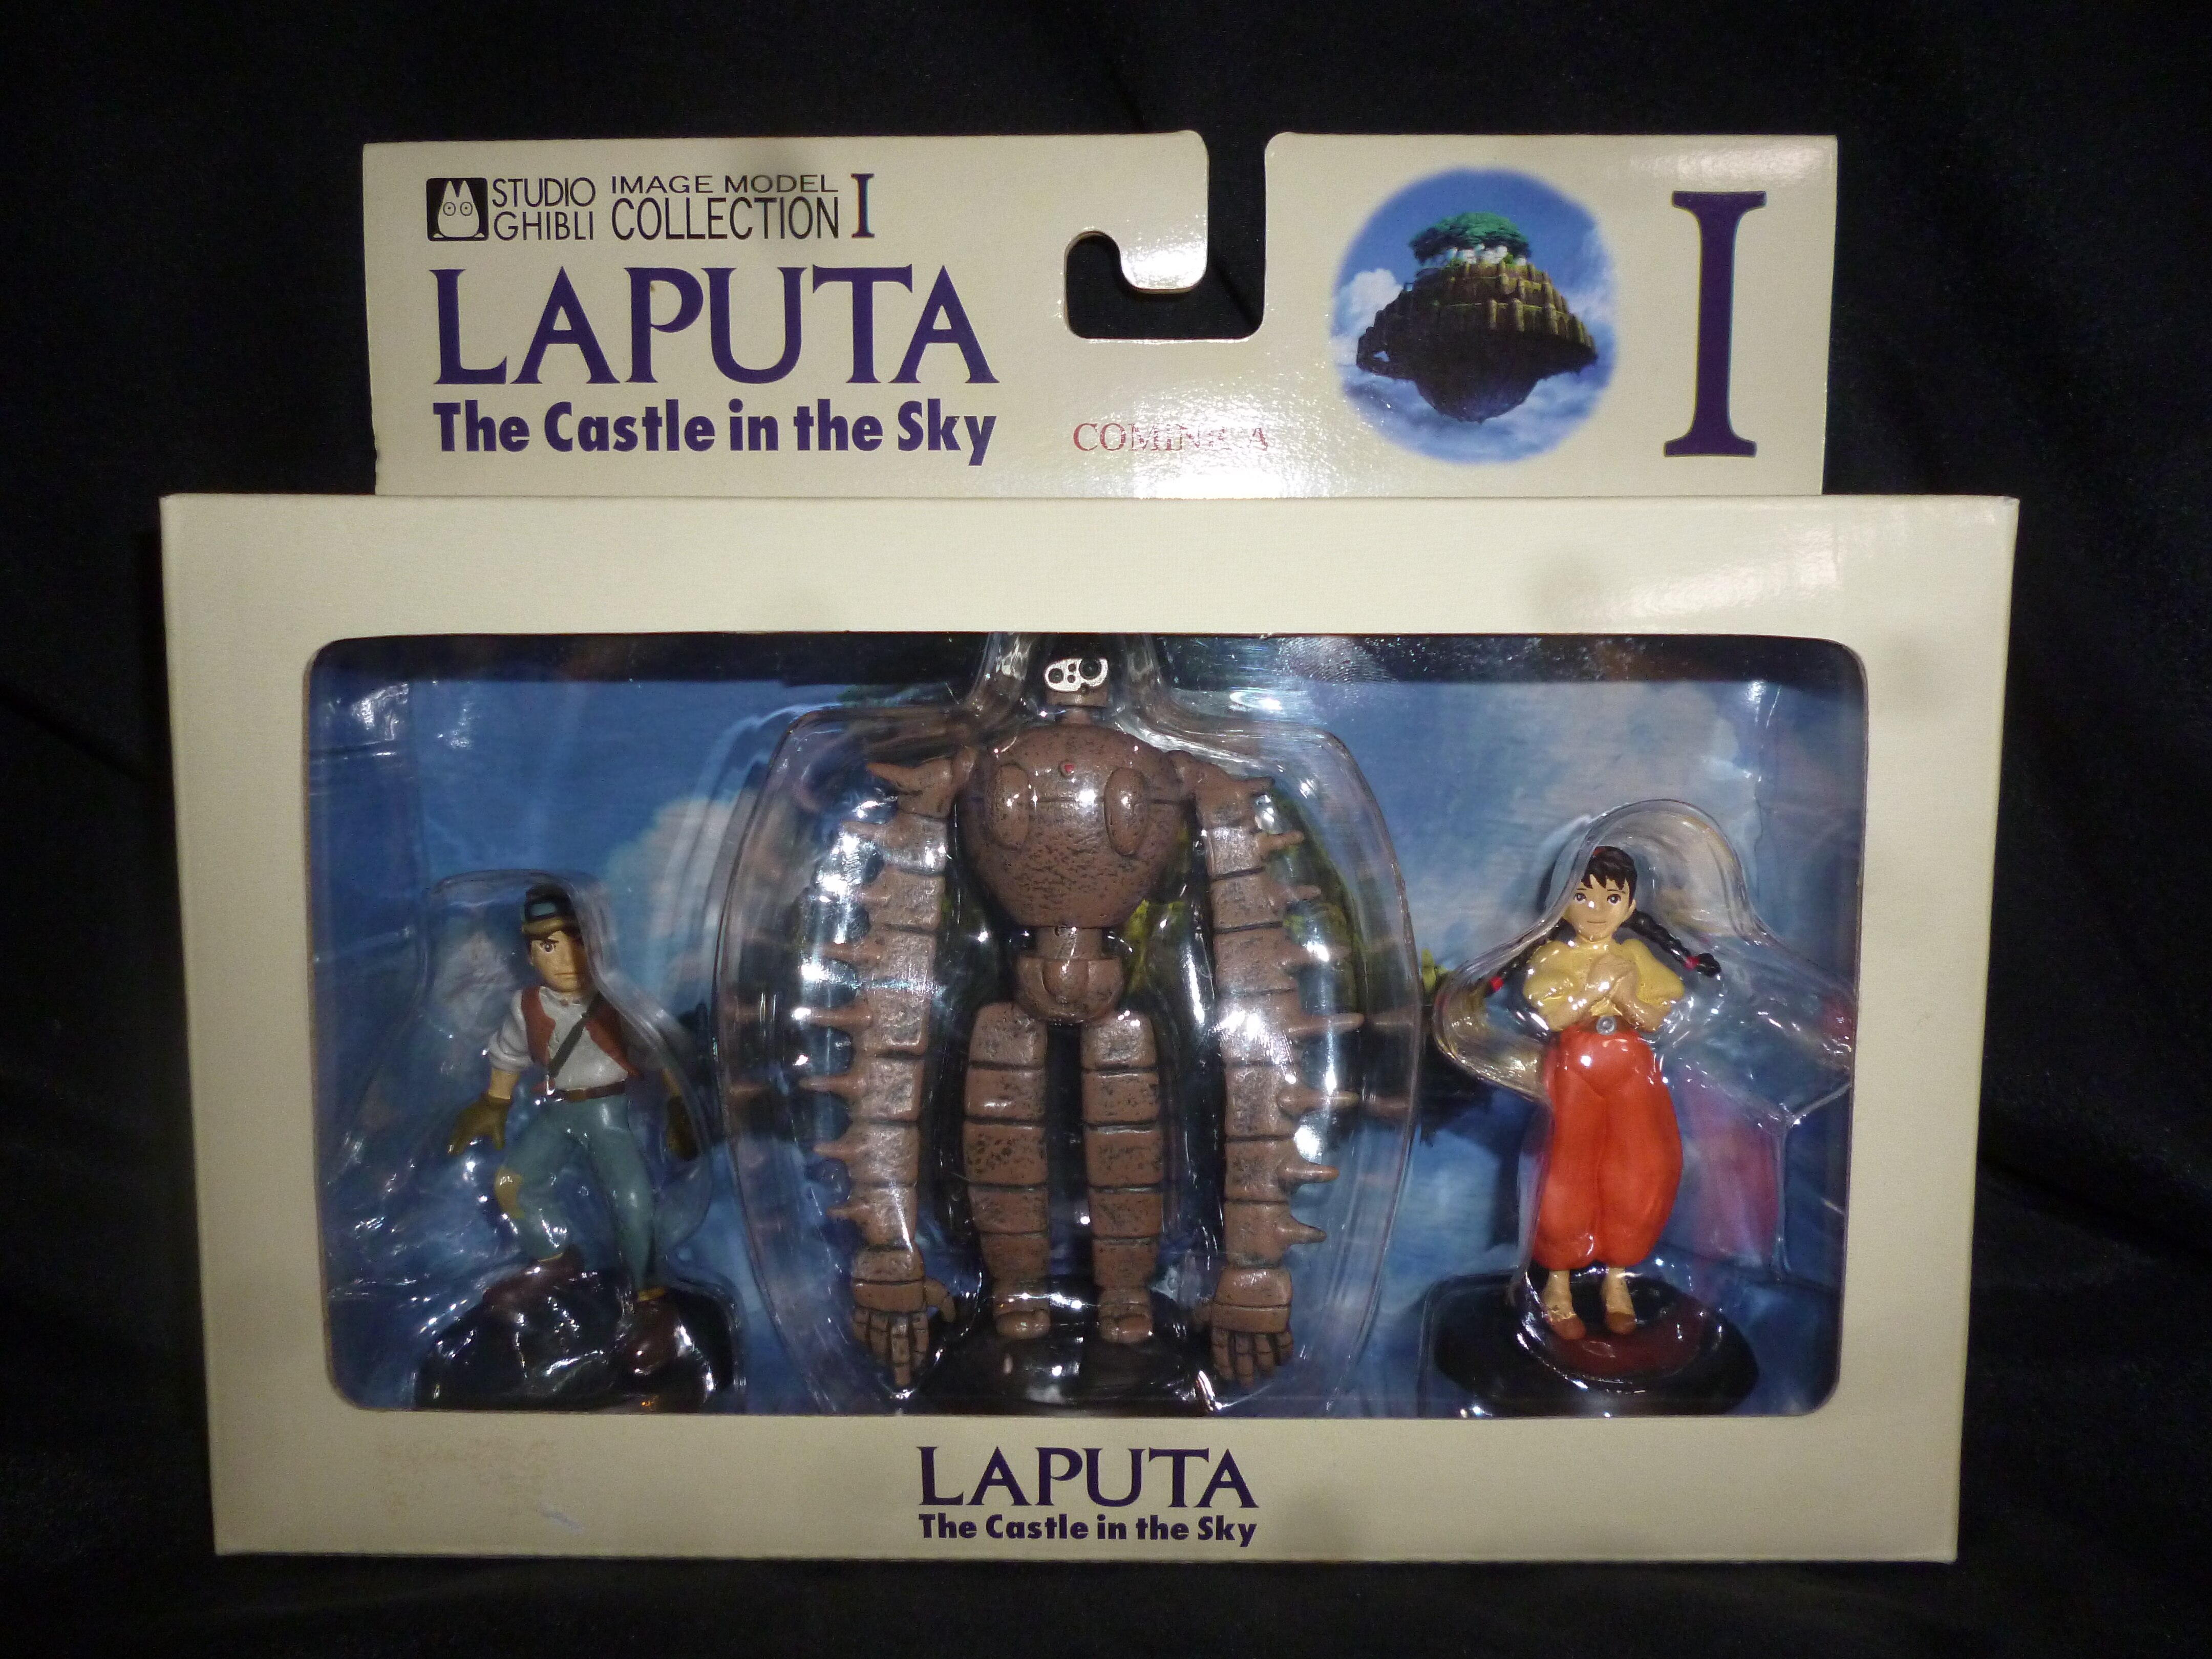 Cominica Studio Ghibli Robot Soldier and Sheeta and Pazu Image Model  Collection Laputa: Castle in the Sky 1 | Mandarake Online Shop